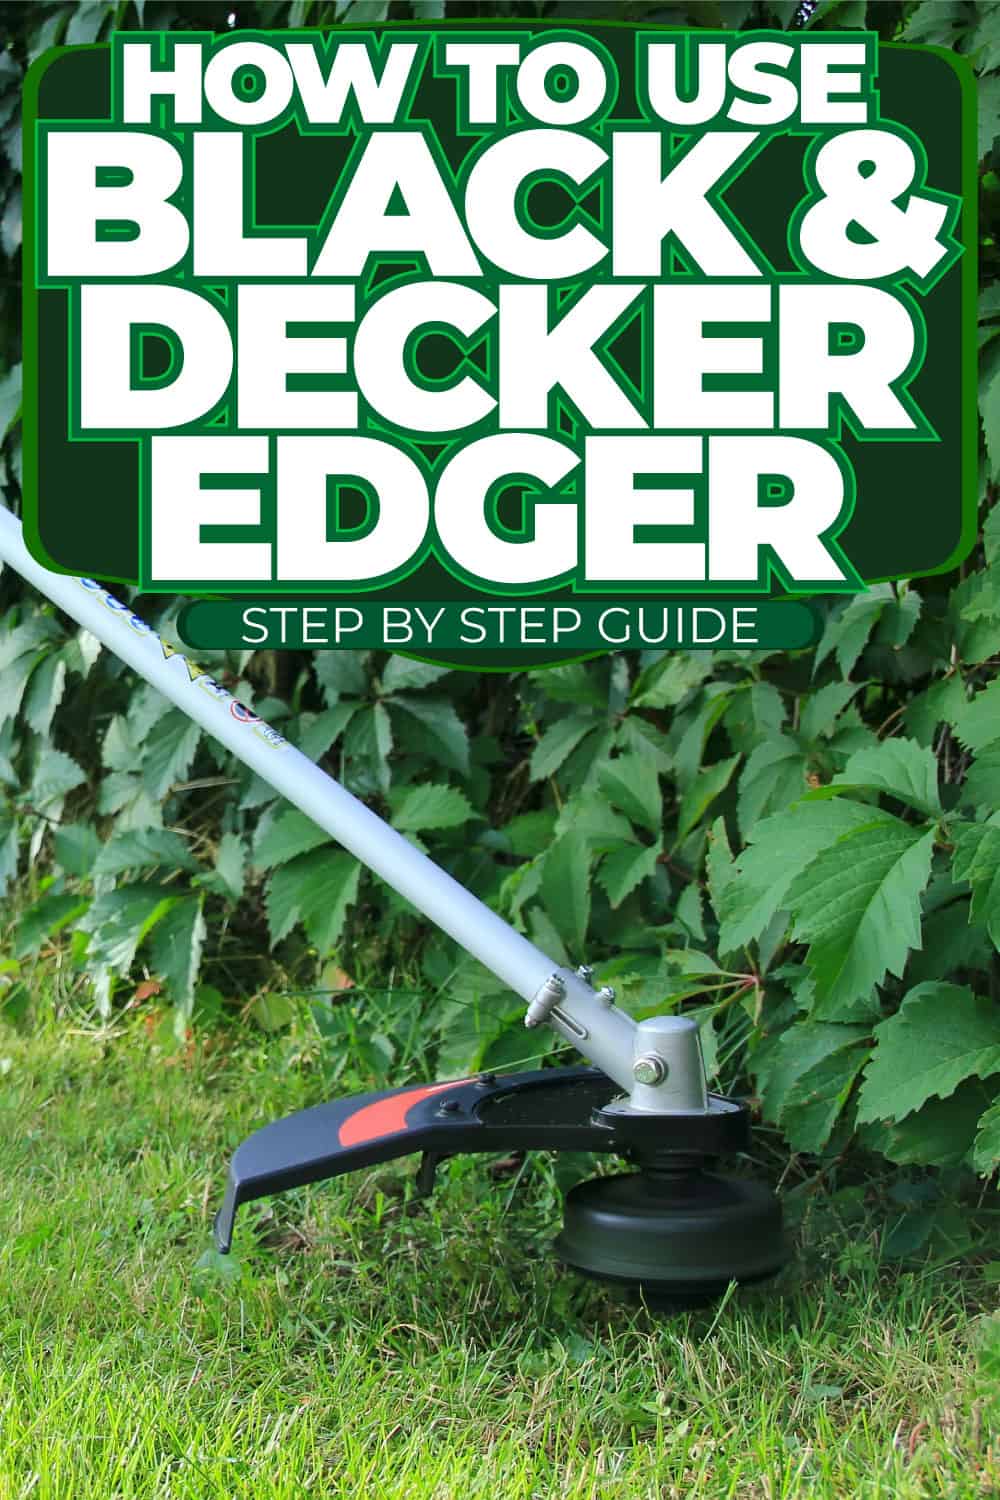 How To Use Black & Decker Edger [Step By Step Guide]